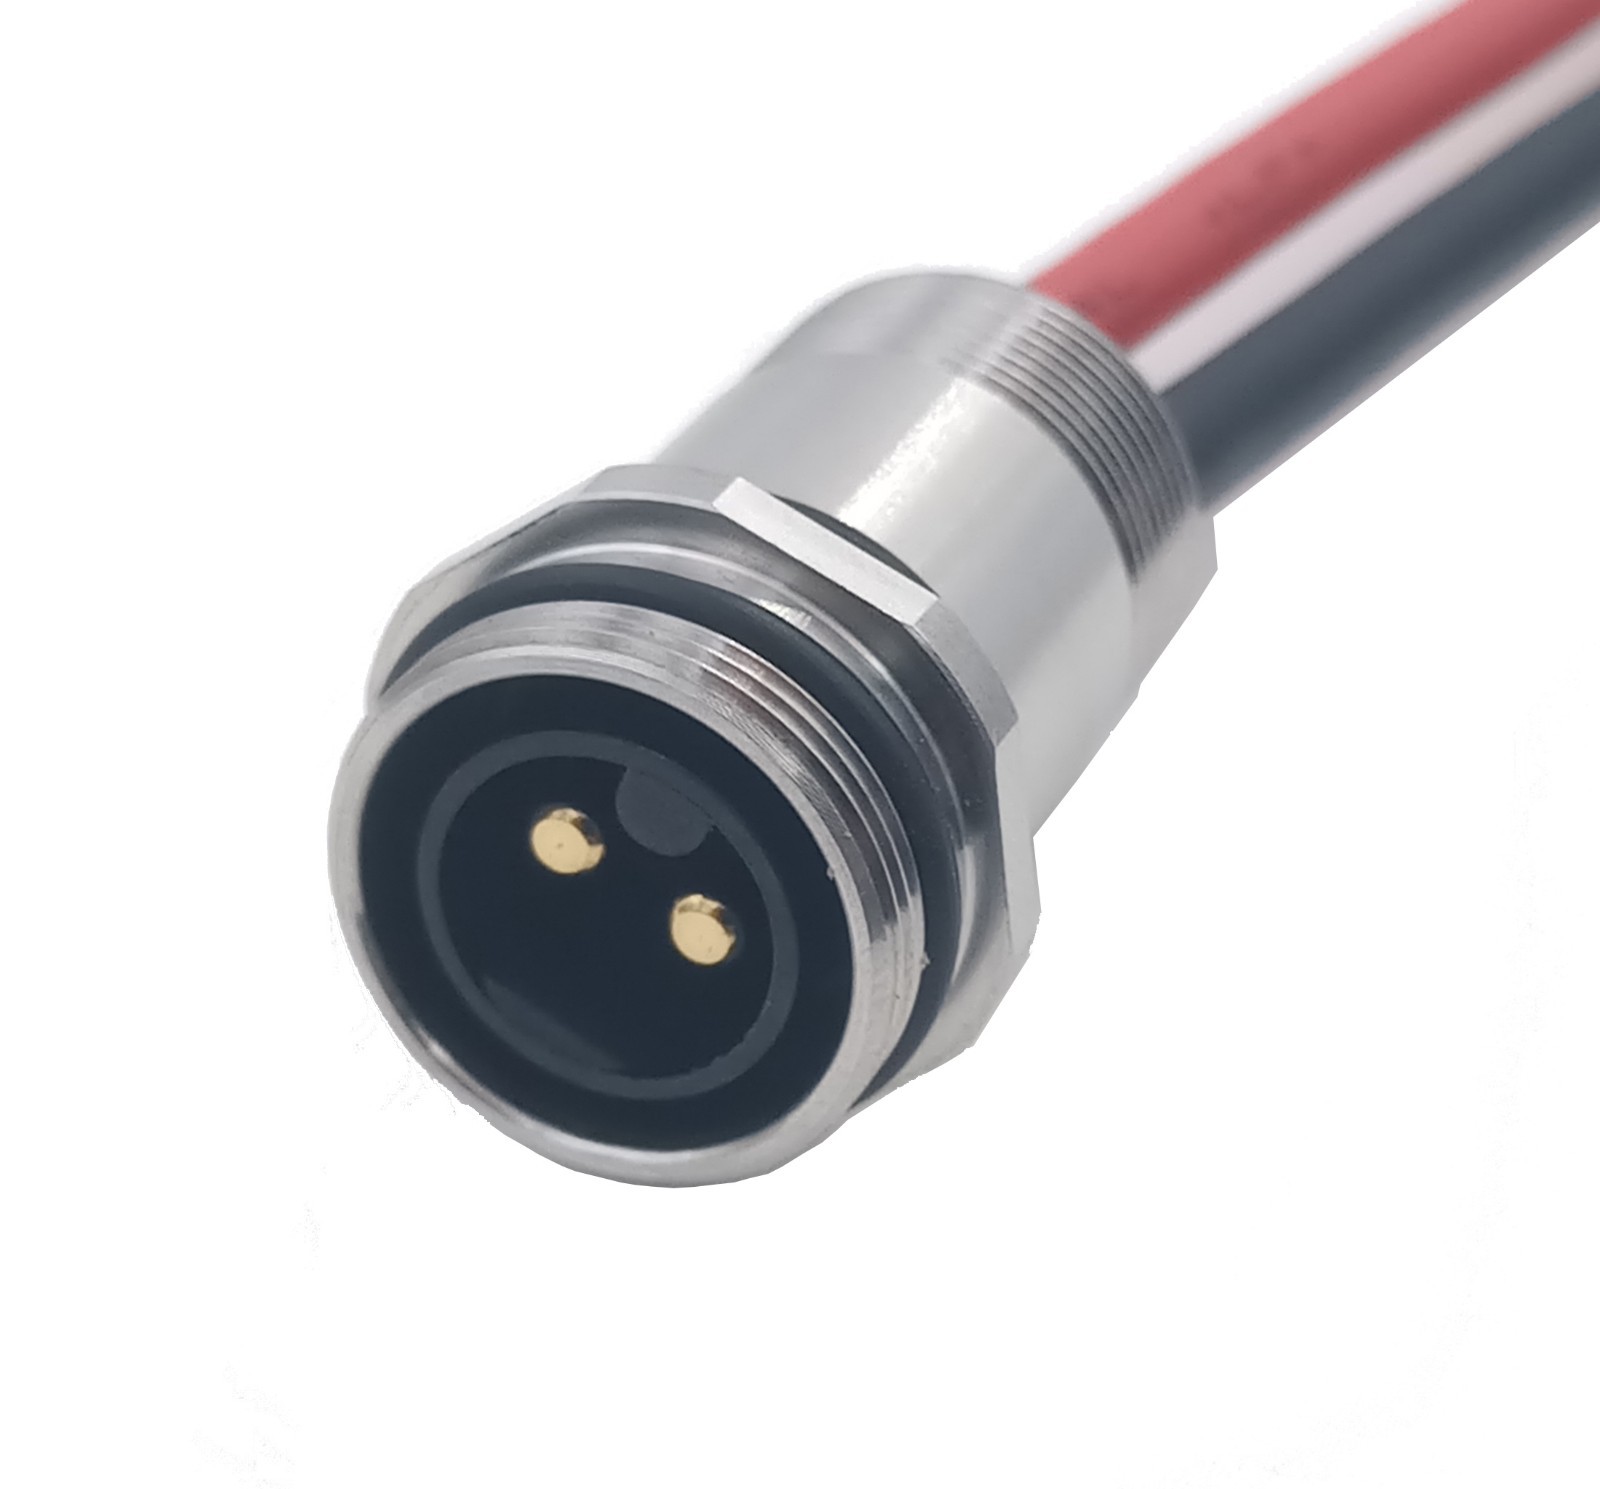 M16 waterproof connector male plug with two cores